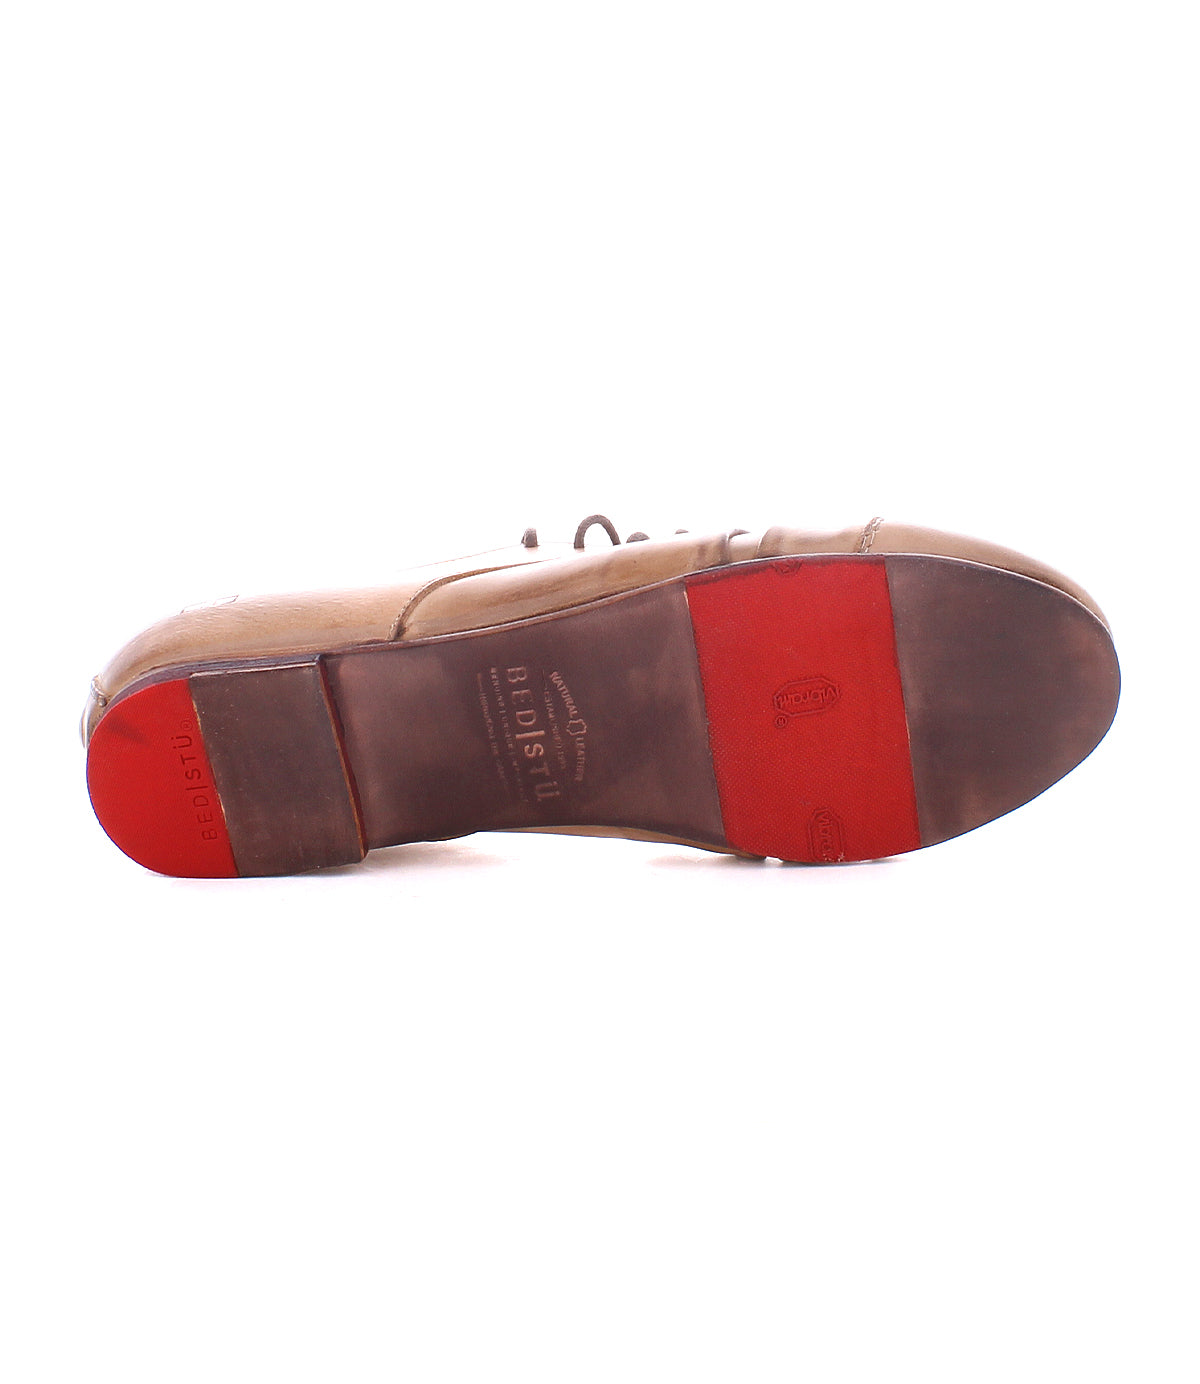 The sole of the Bed Stu Rumba II brown leather dress shoe with red rubber heel and forefoot pads, showing wear marks and branding, combines wingtip flair with sneaker comfort.